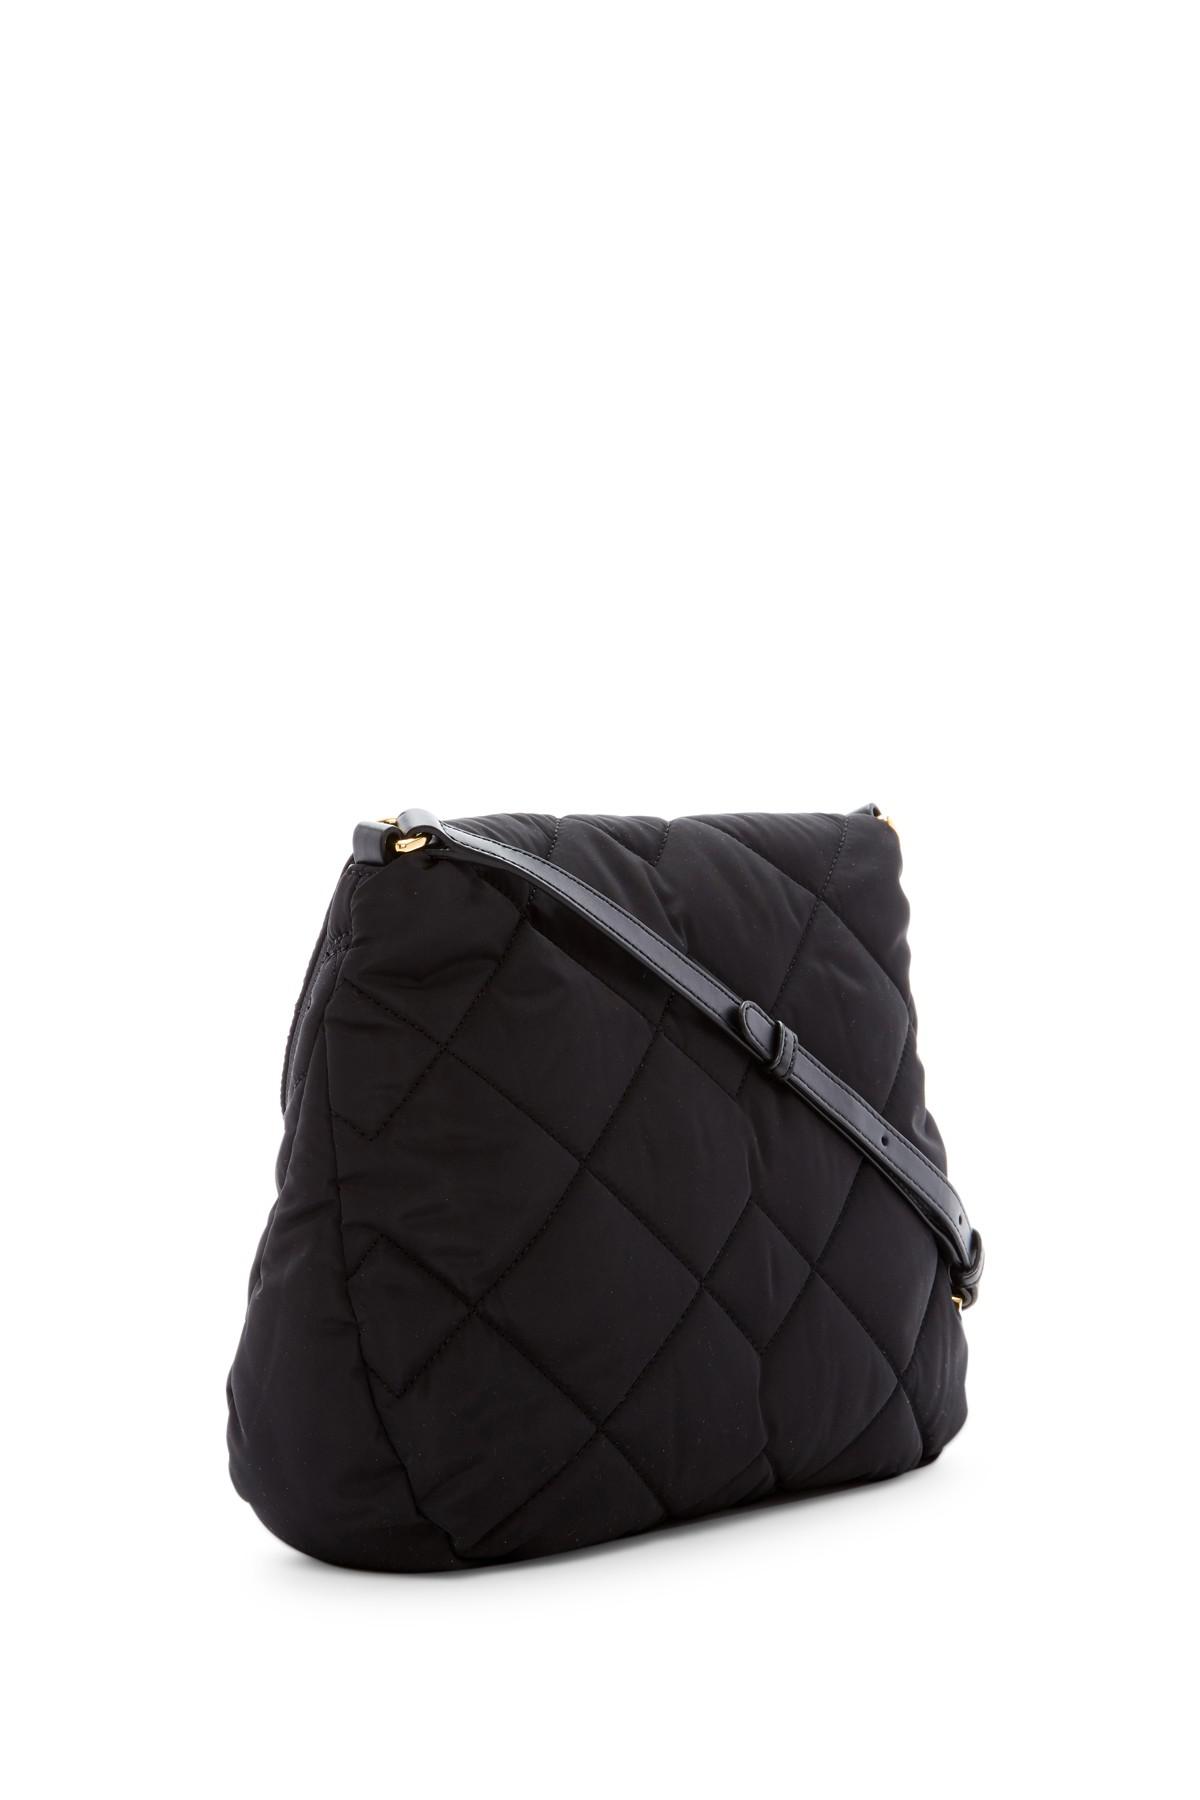 Lyst - Marc Jacobs Quilted Nylon Messenger Bag in Black